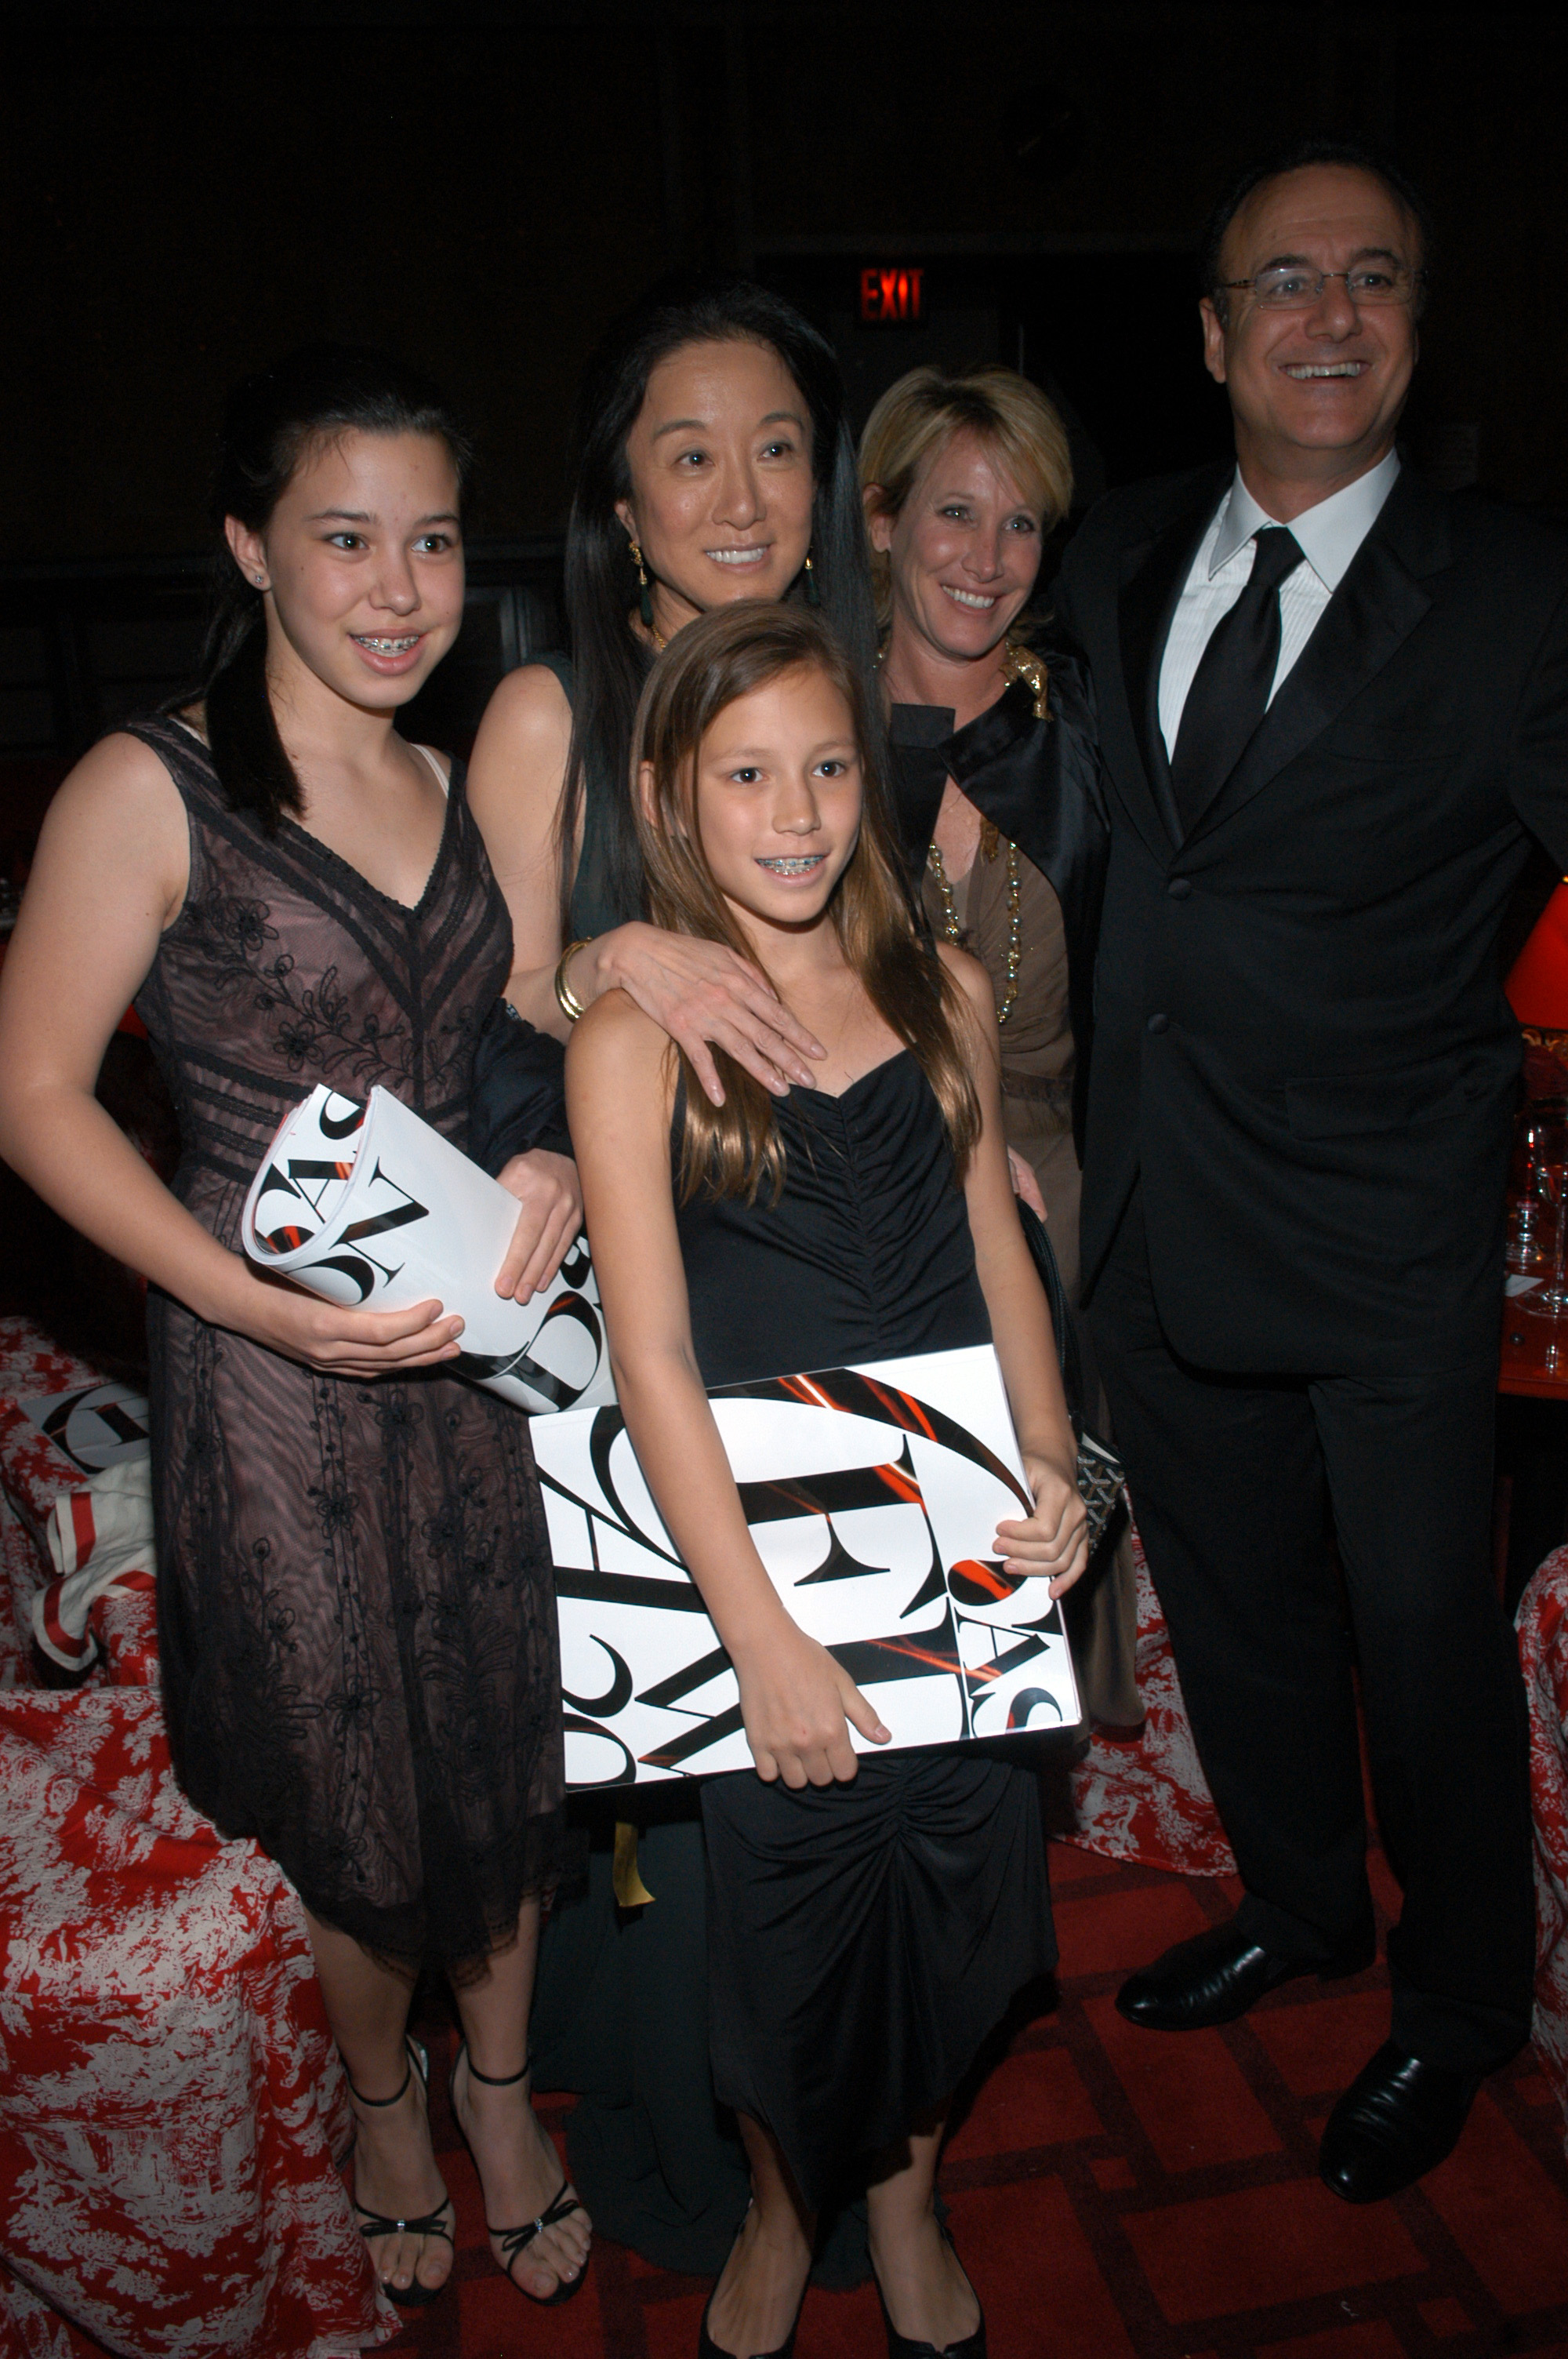 Cecilia Becker, Josephine Becker, and Vera Wang at the Council of Fashion Designers of America's 2005 Fashion Awards in New York City on June 6, 2005 | Source: Getty Images